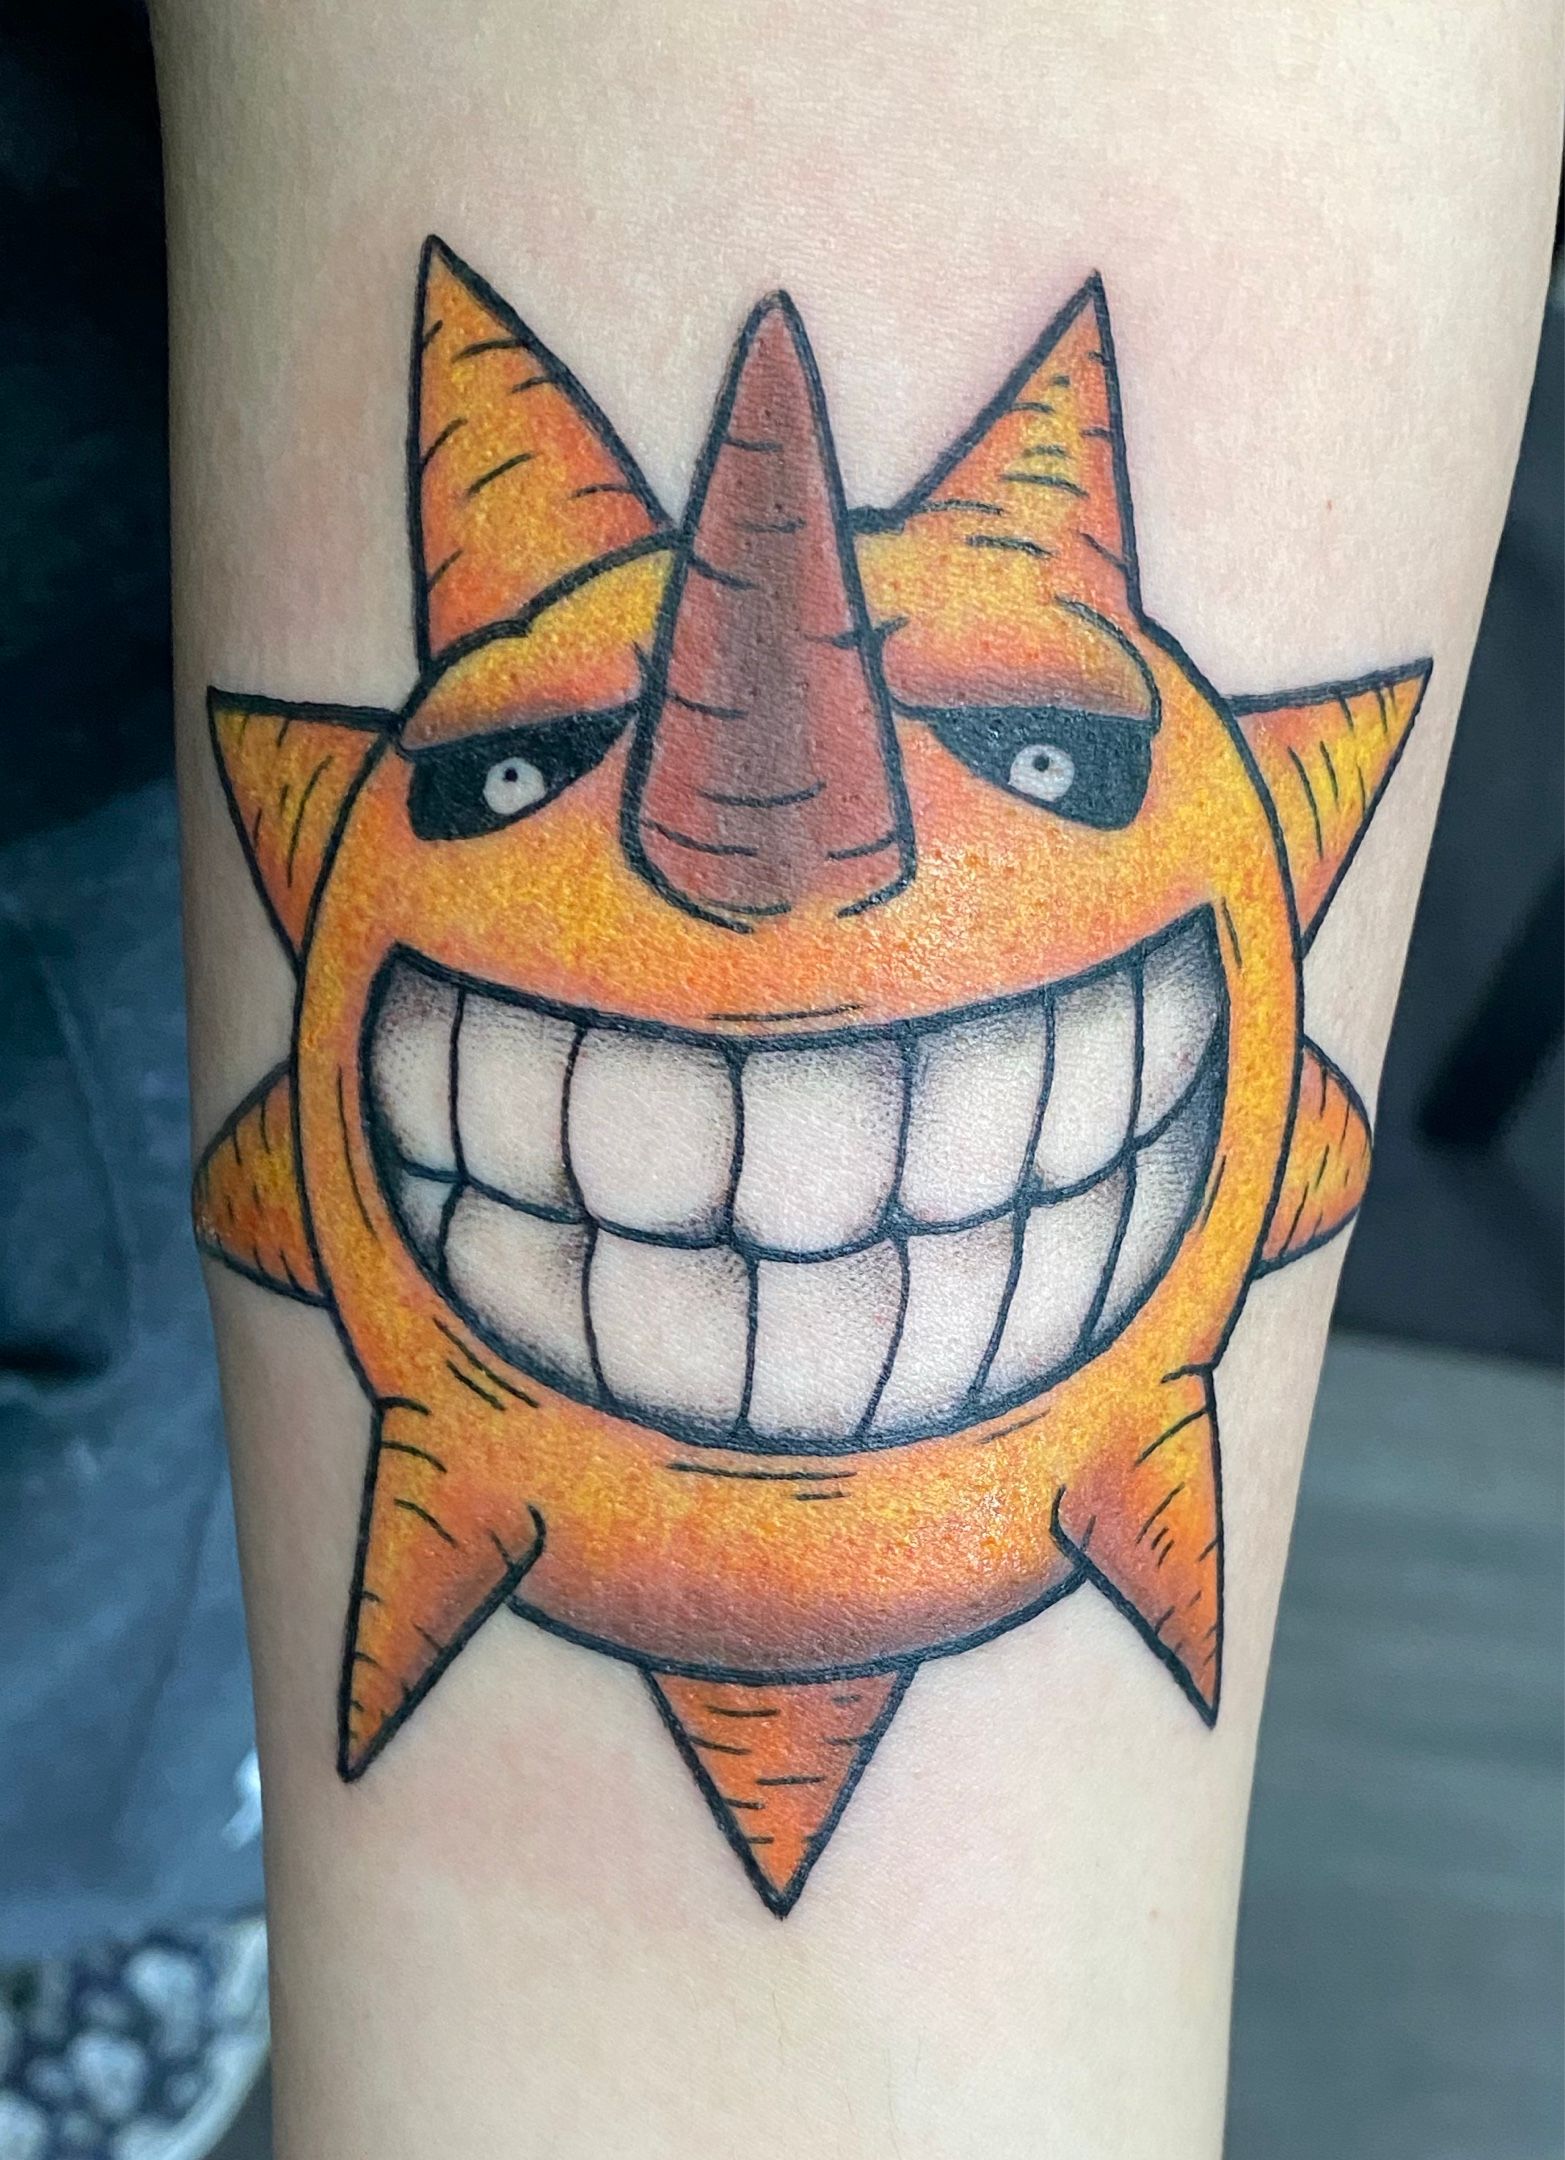 Dr. Stein Tattoo - Soul Eater